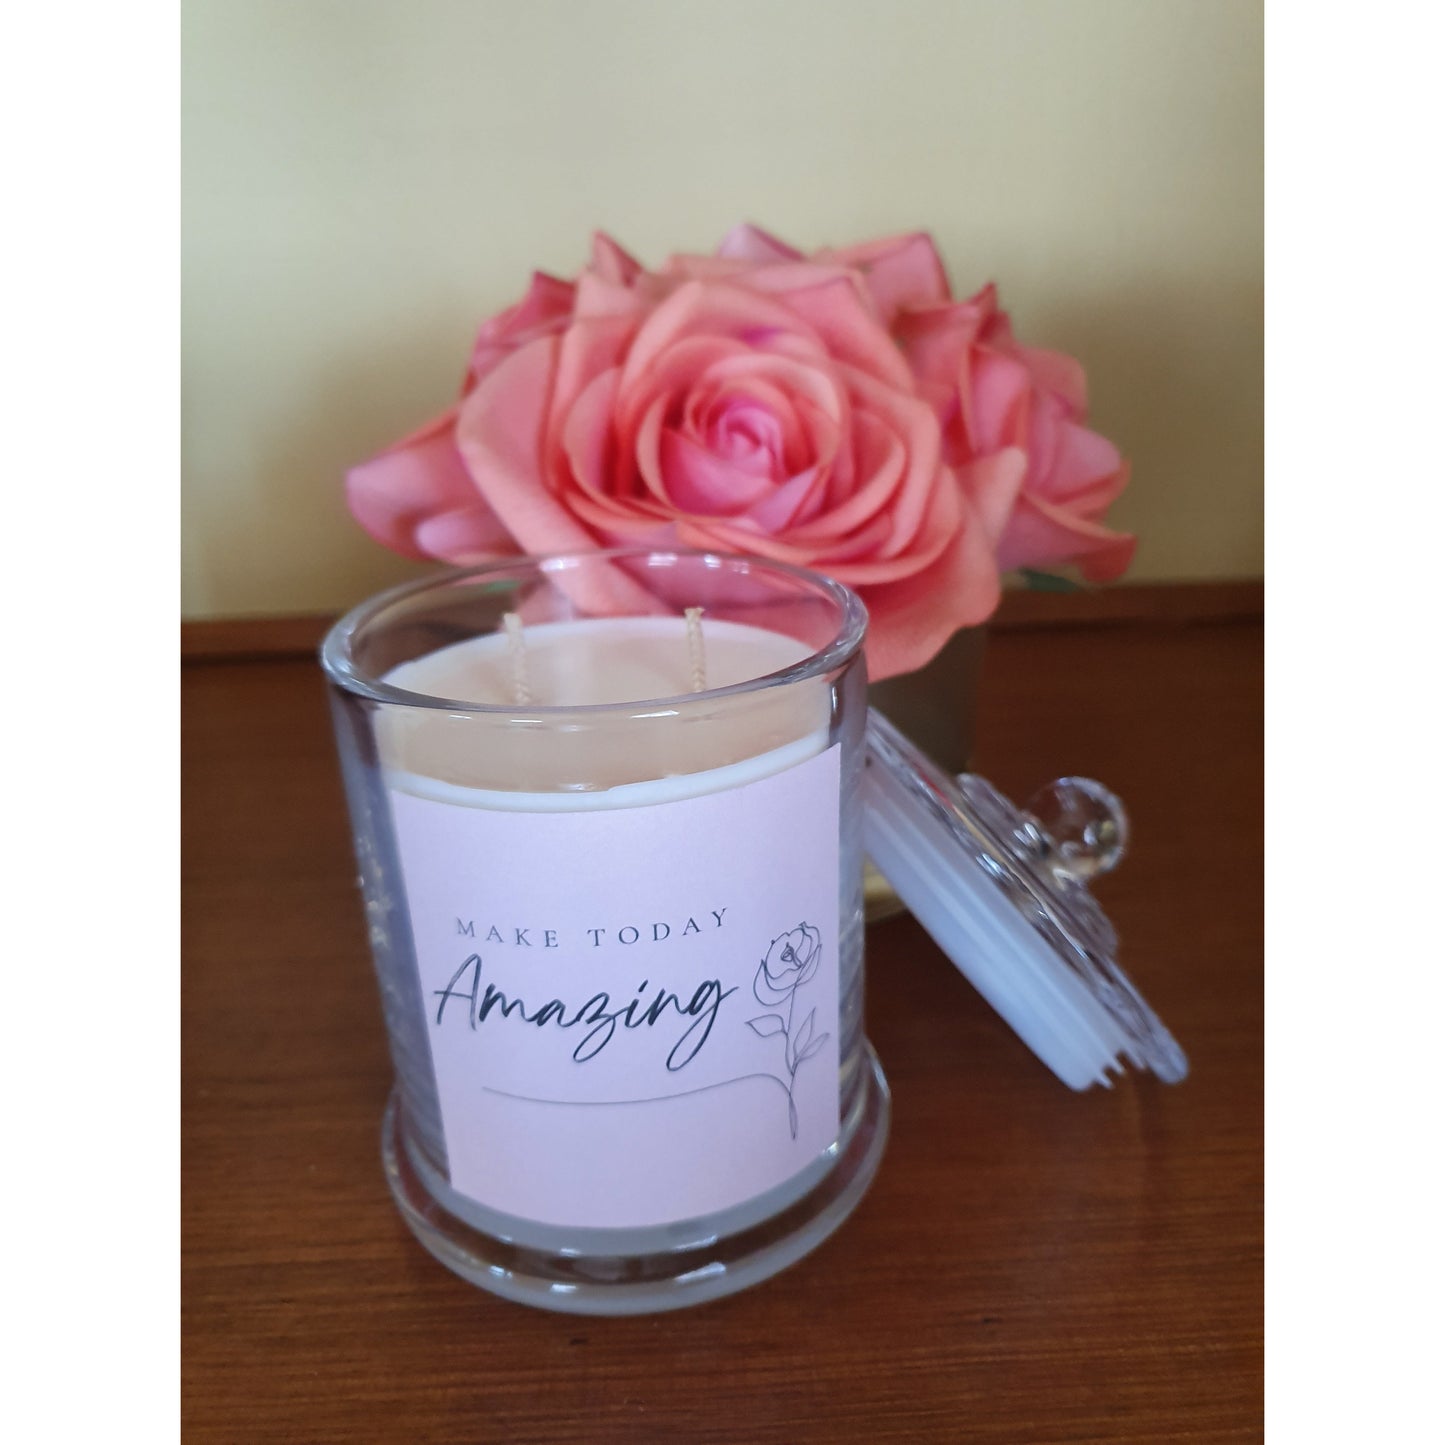 Inspirational Quote Candle- Make Today Amazing